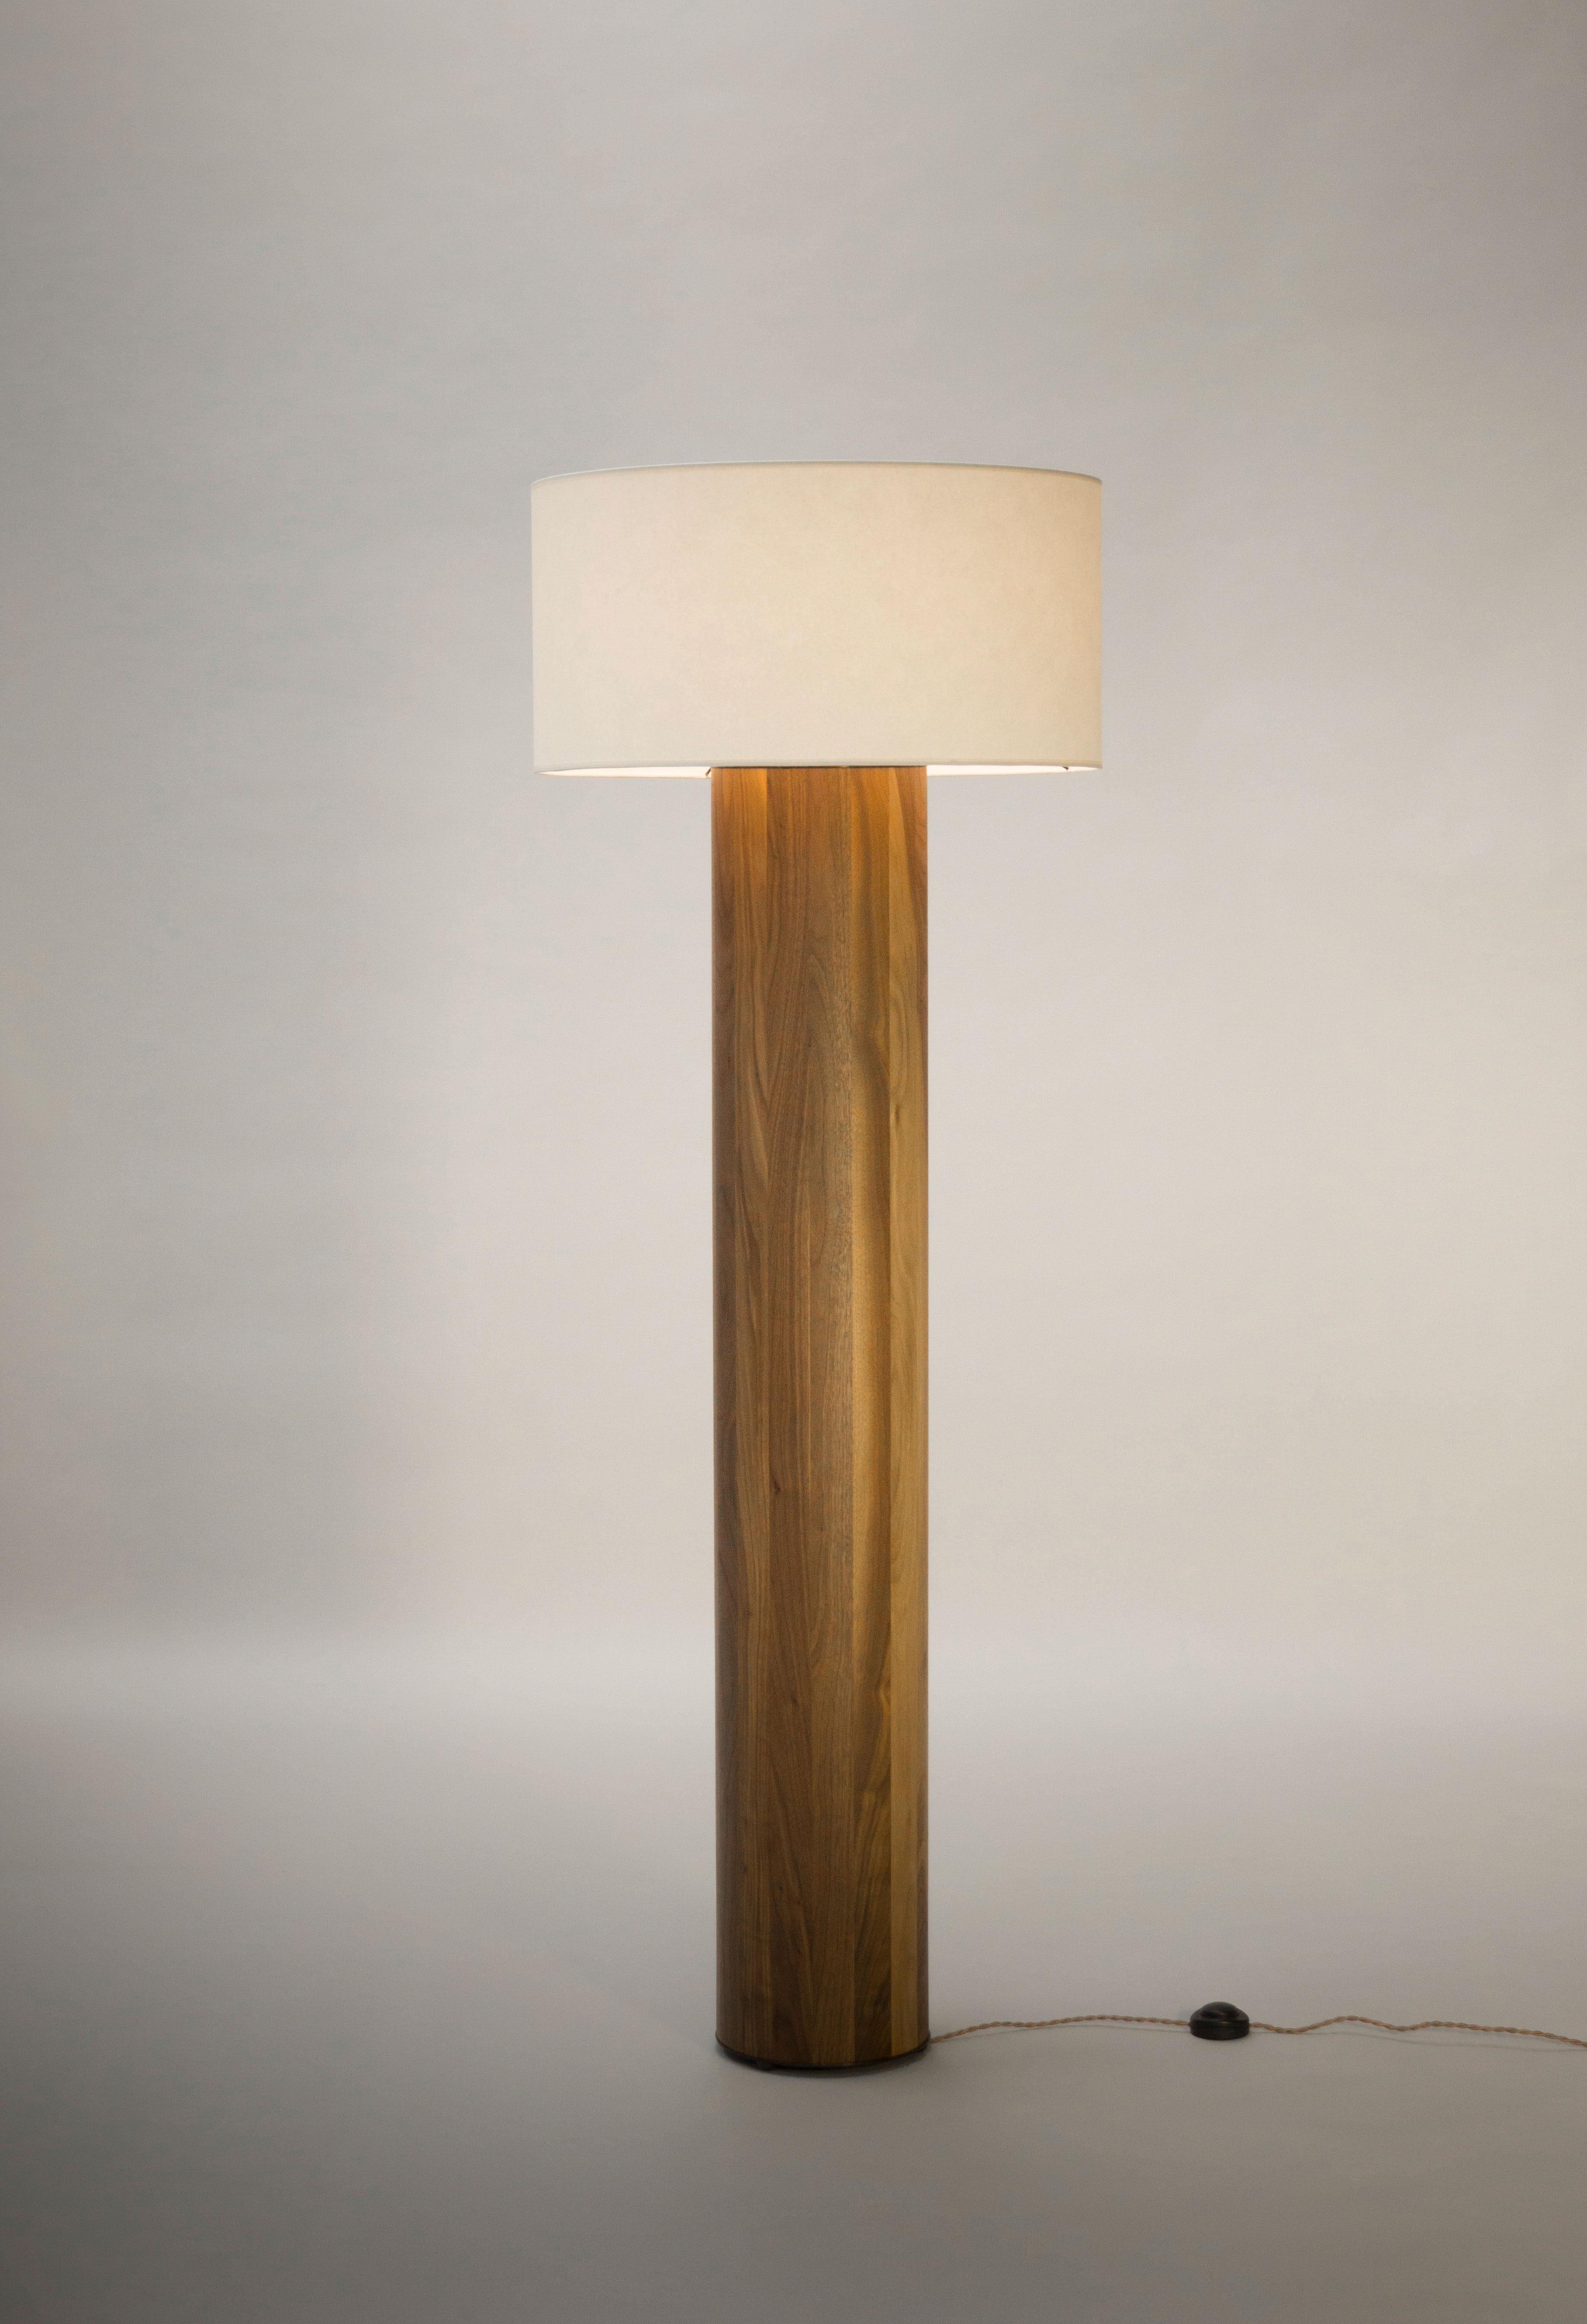 Timeless elegant Walnut wood floor lamp by Tinatin Kilaberidze exclusively designed for Valerie Goodman Gallery. The dimensions of the base are 55